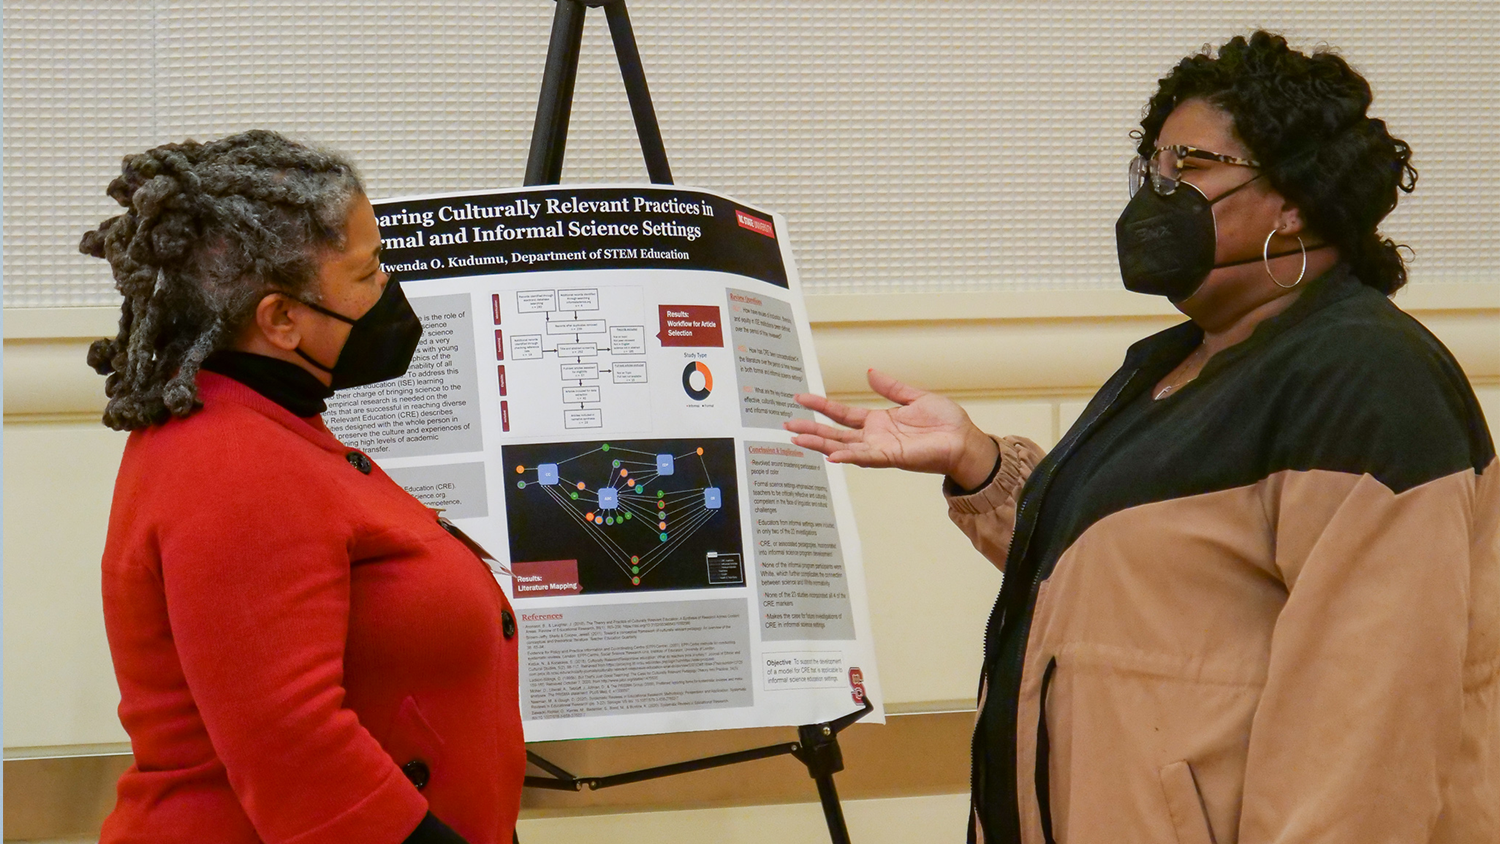 Two people speak in front of a poster presentation